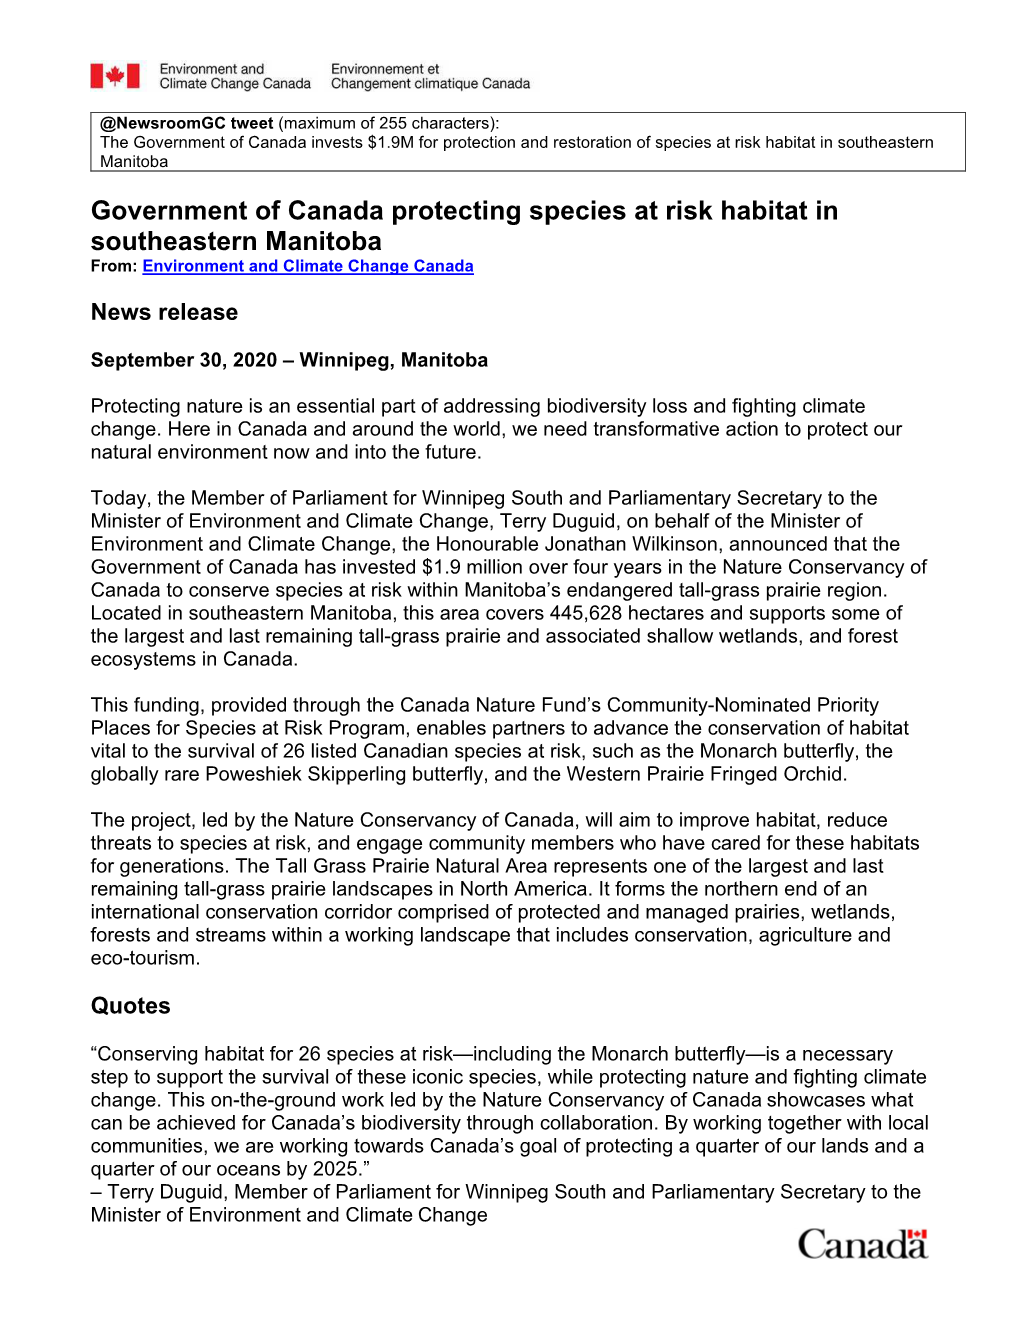 Government of Canada Protecting Species at Risk Habitat in Southeastern Manitoba From: Environment and Climate Change Canada